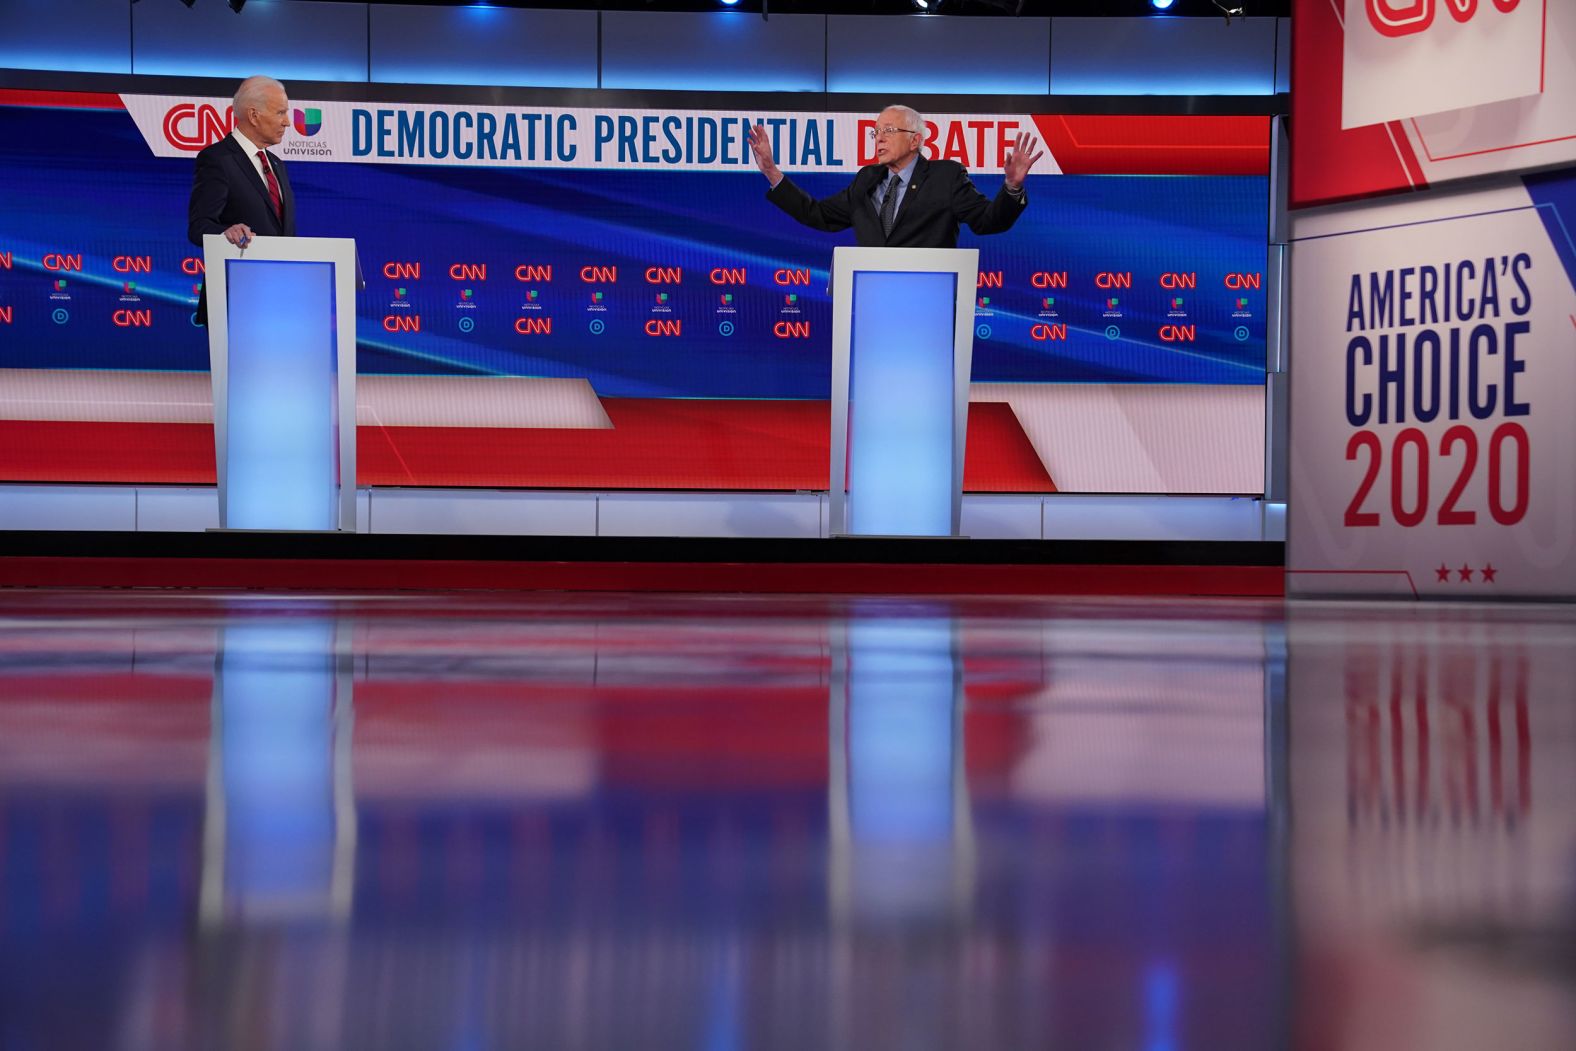 Sanders said during the debate that the government <a href="index.php?page=&url=https%3A%2F%2Fwww.cnn.com%2Fpolitics%2Flive-news%2F2020-democratic-debate-live-updates%2Fh_ec7ded0cd5b9972498188272d1658145" target="_blank">should pay for all coronavirus testing and treatment.</a> "Do not worry about the cost right now," he said. "Because we're in the middle of a national emergency."